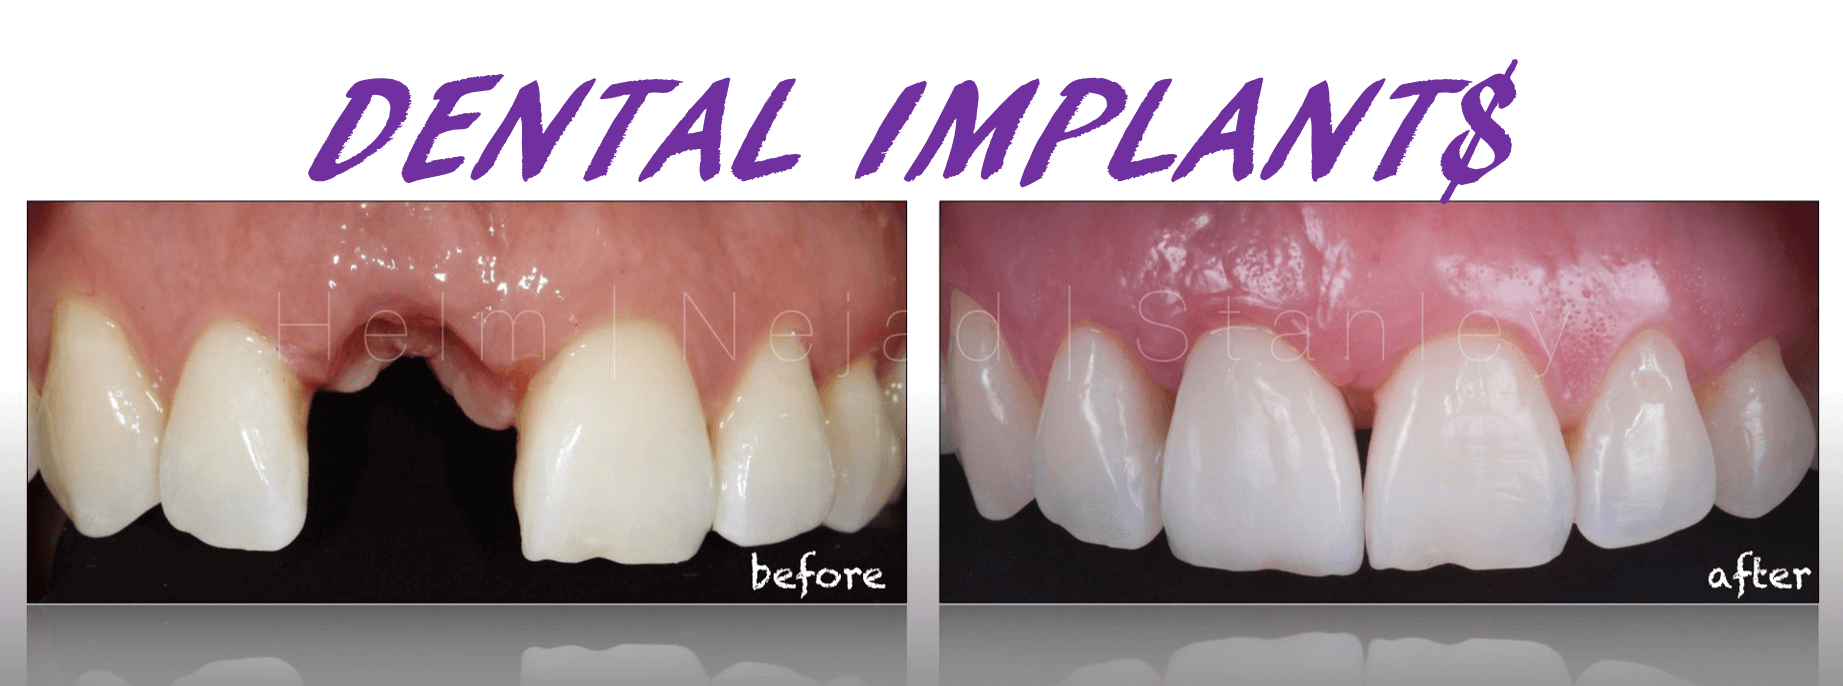 how much are dental implants?